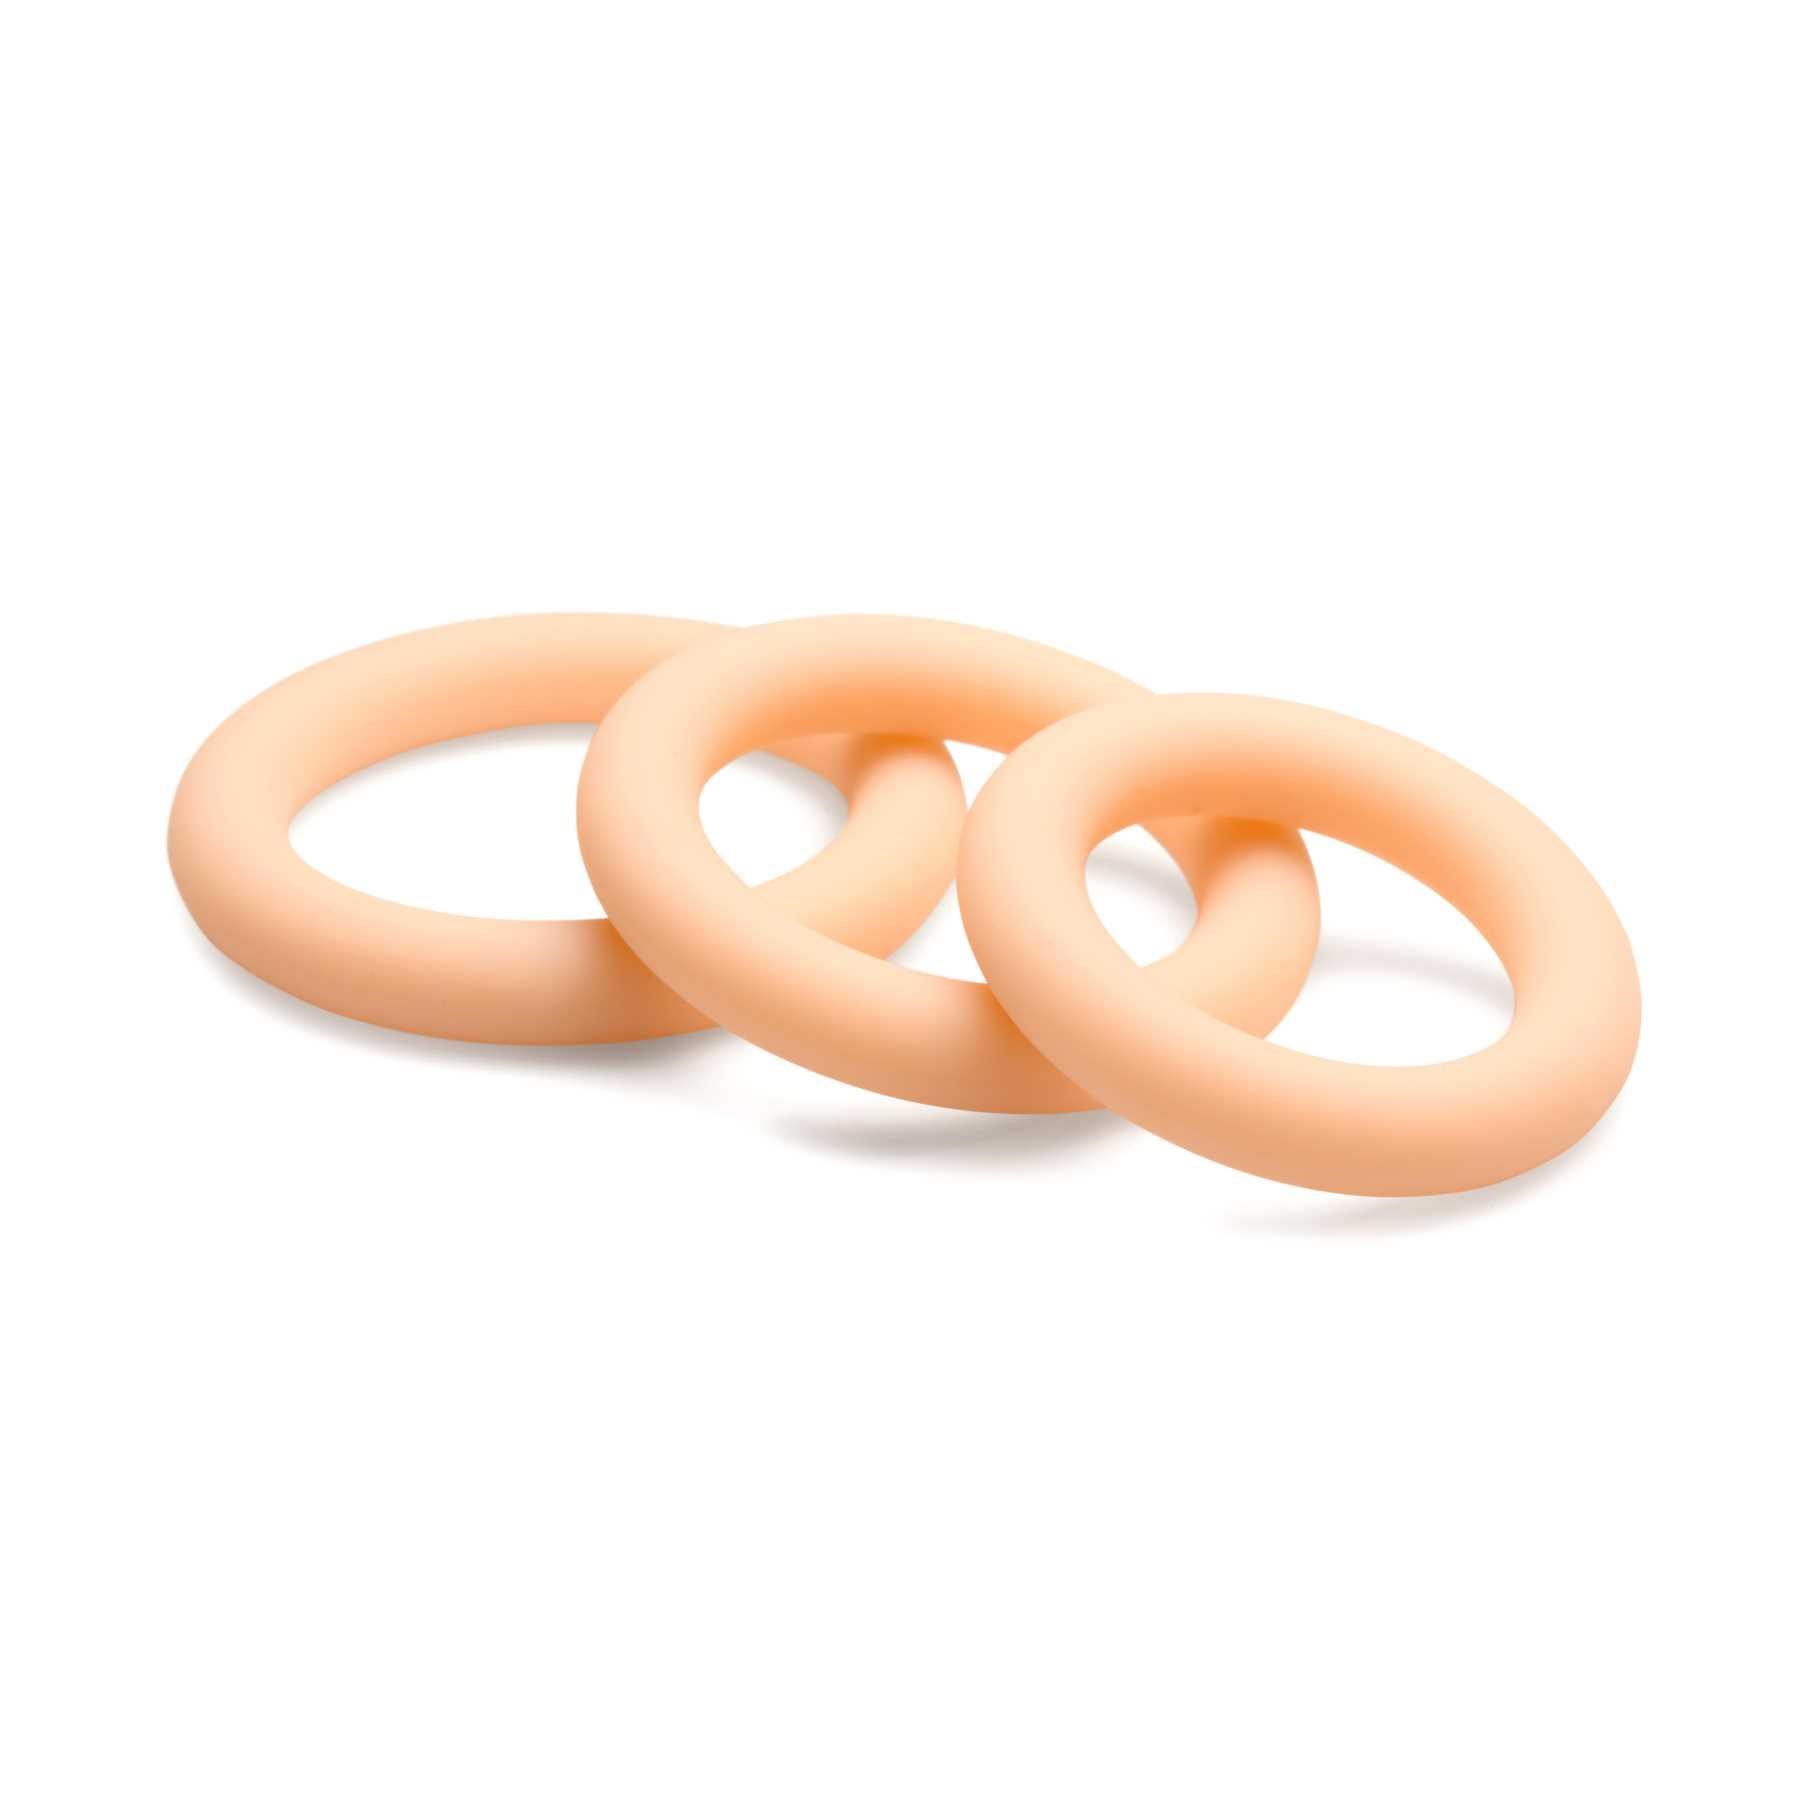 Jock Silicone Cock Ring Set white 3 rings stacked